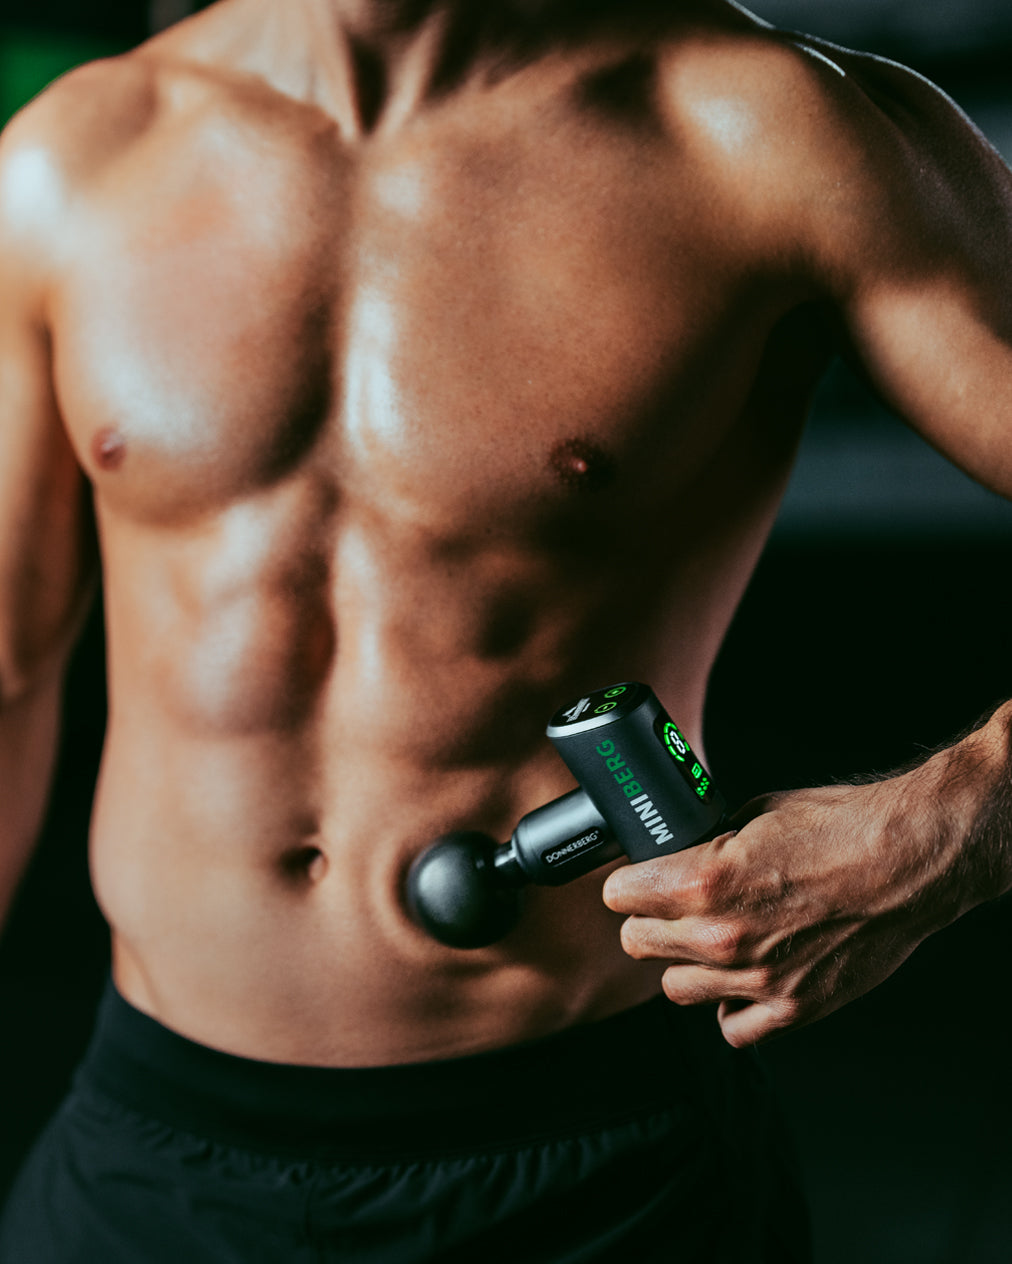 Can I Use A Massage Gun for Muscle Growth?